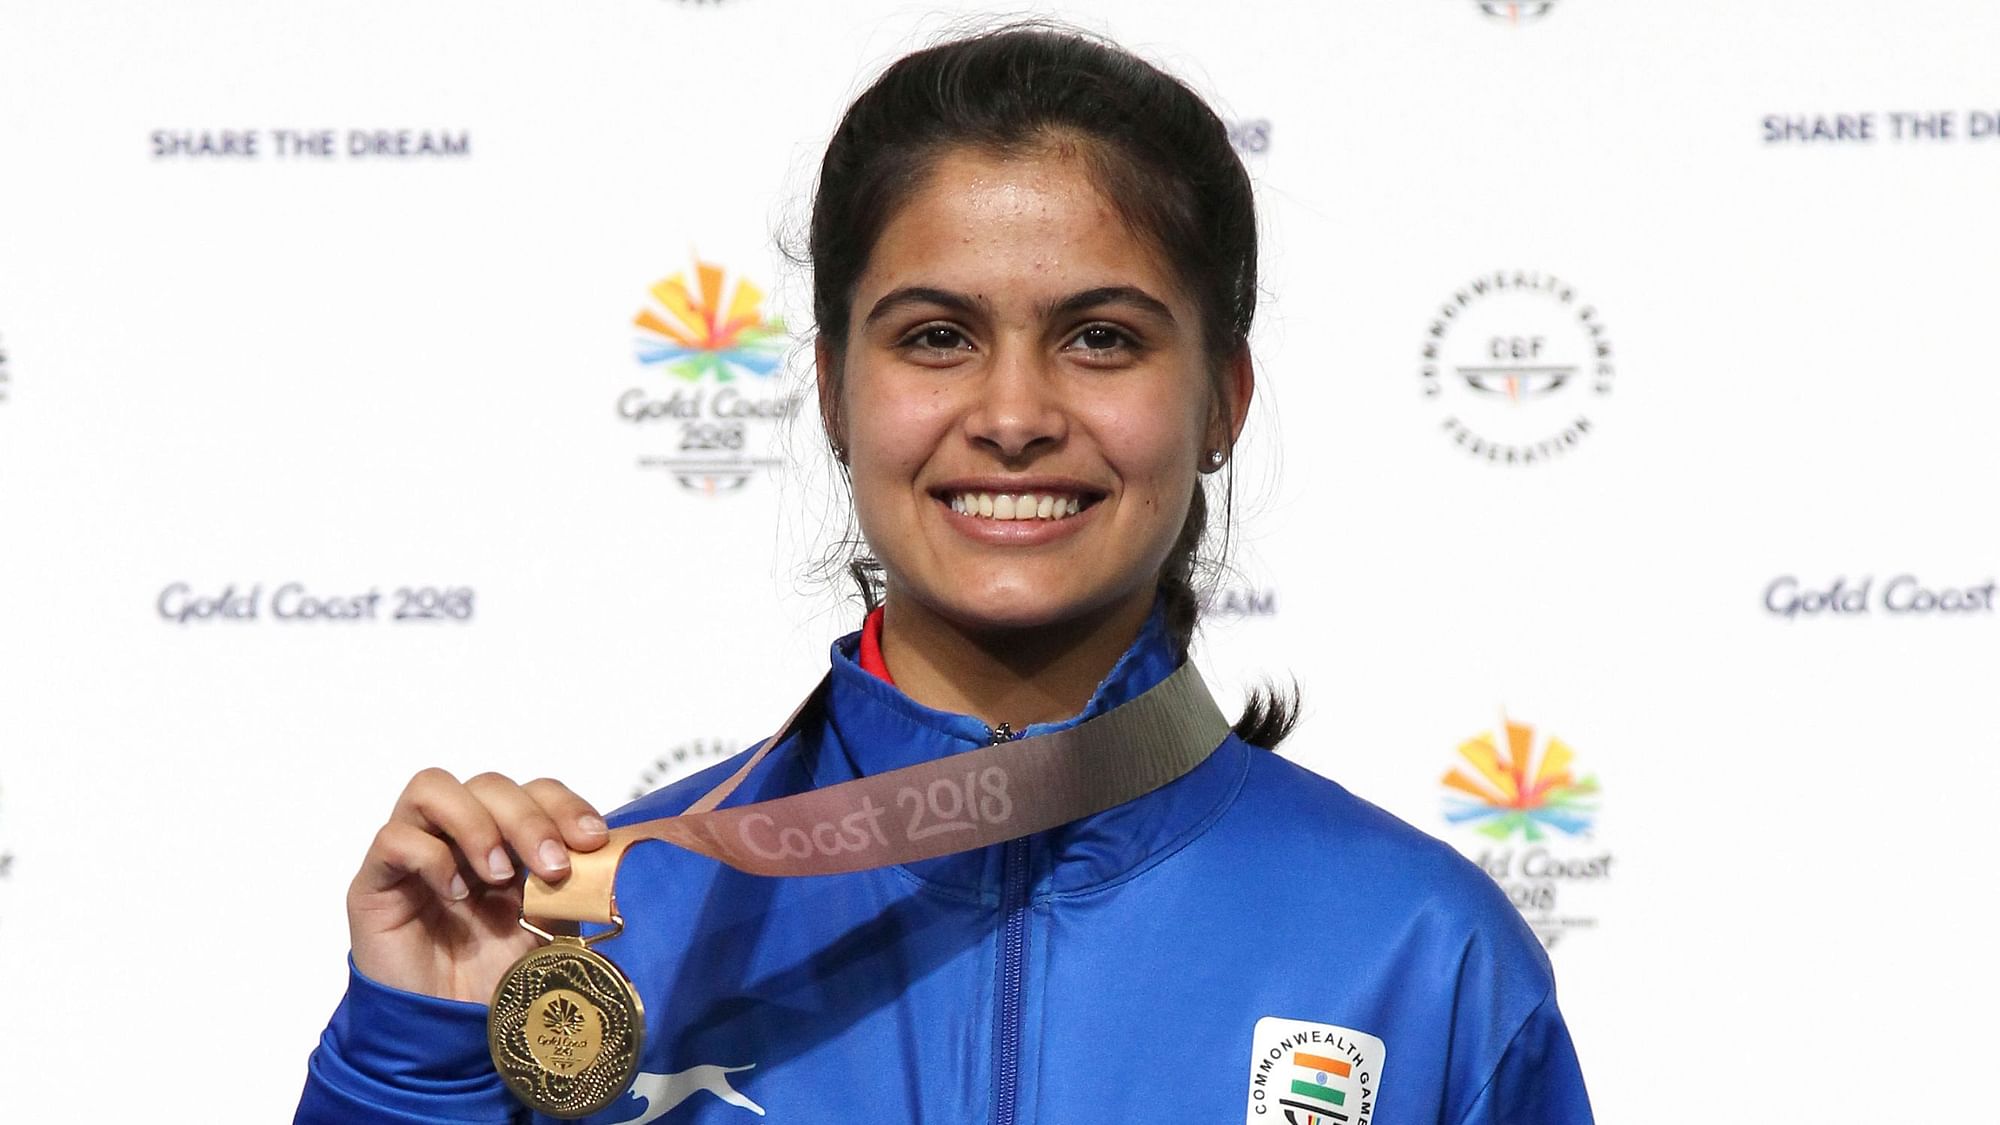 Manu Bhaker said that her preparation for the olympics is on track and there is nothing to change at this stage.